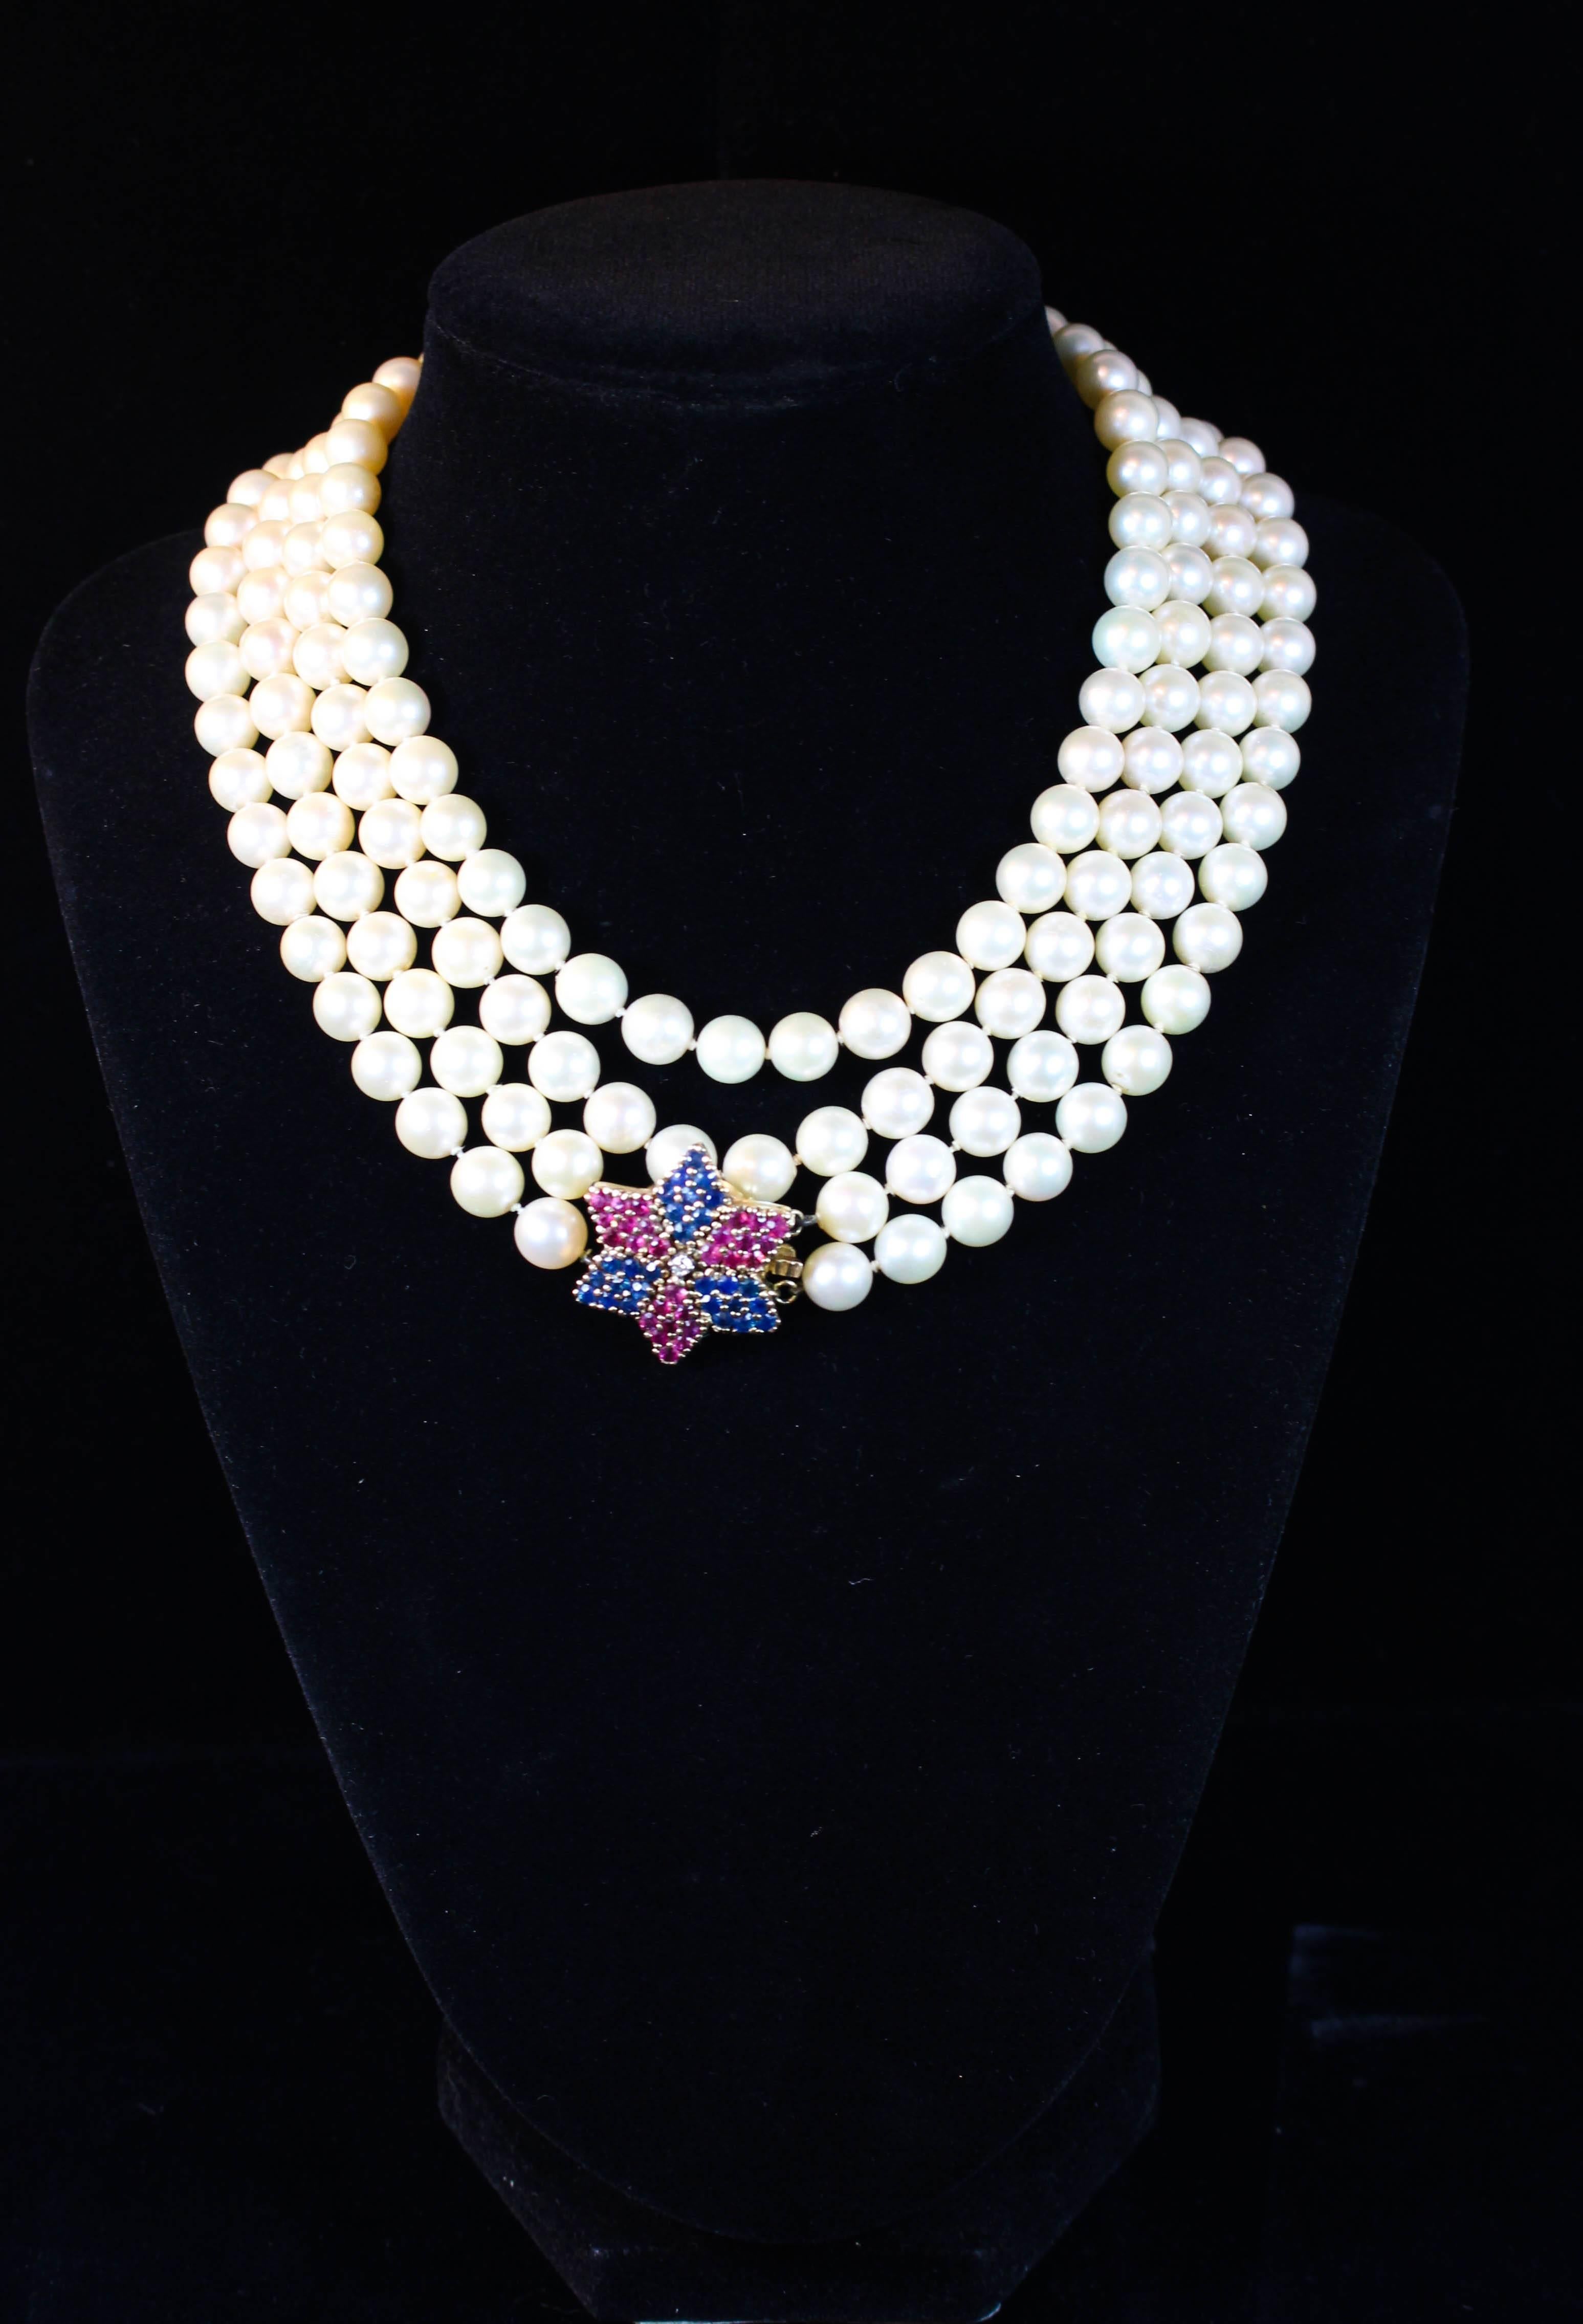 This necklace is composed of a double strand of pearls with a stunning 14kt gold clasp with rubies and sapphires. Can be styled in a variety of ways. Specs below. In excellent condition.

Please feel free to ask any questions you may have, we are